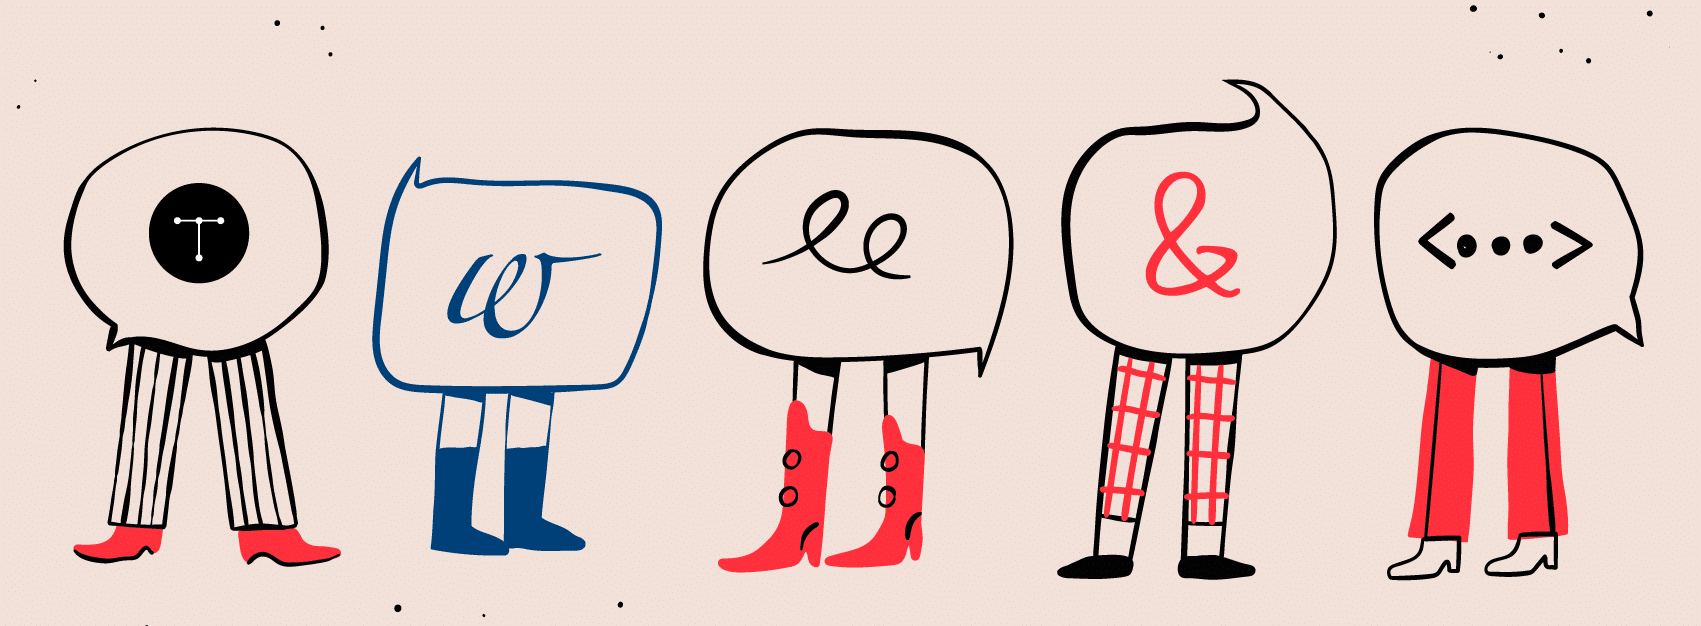 Flat vector illustration of speech bubbles with legs. Each speech bubble contains a different symbol including the Typefi logo, a blue lowercase w, a squiggle, ampersand and a symbol for xml.